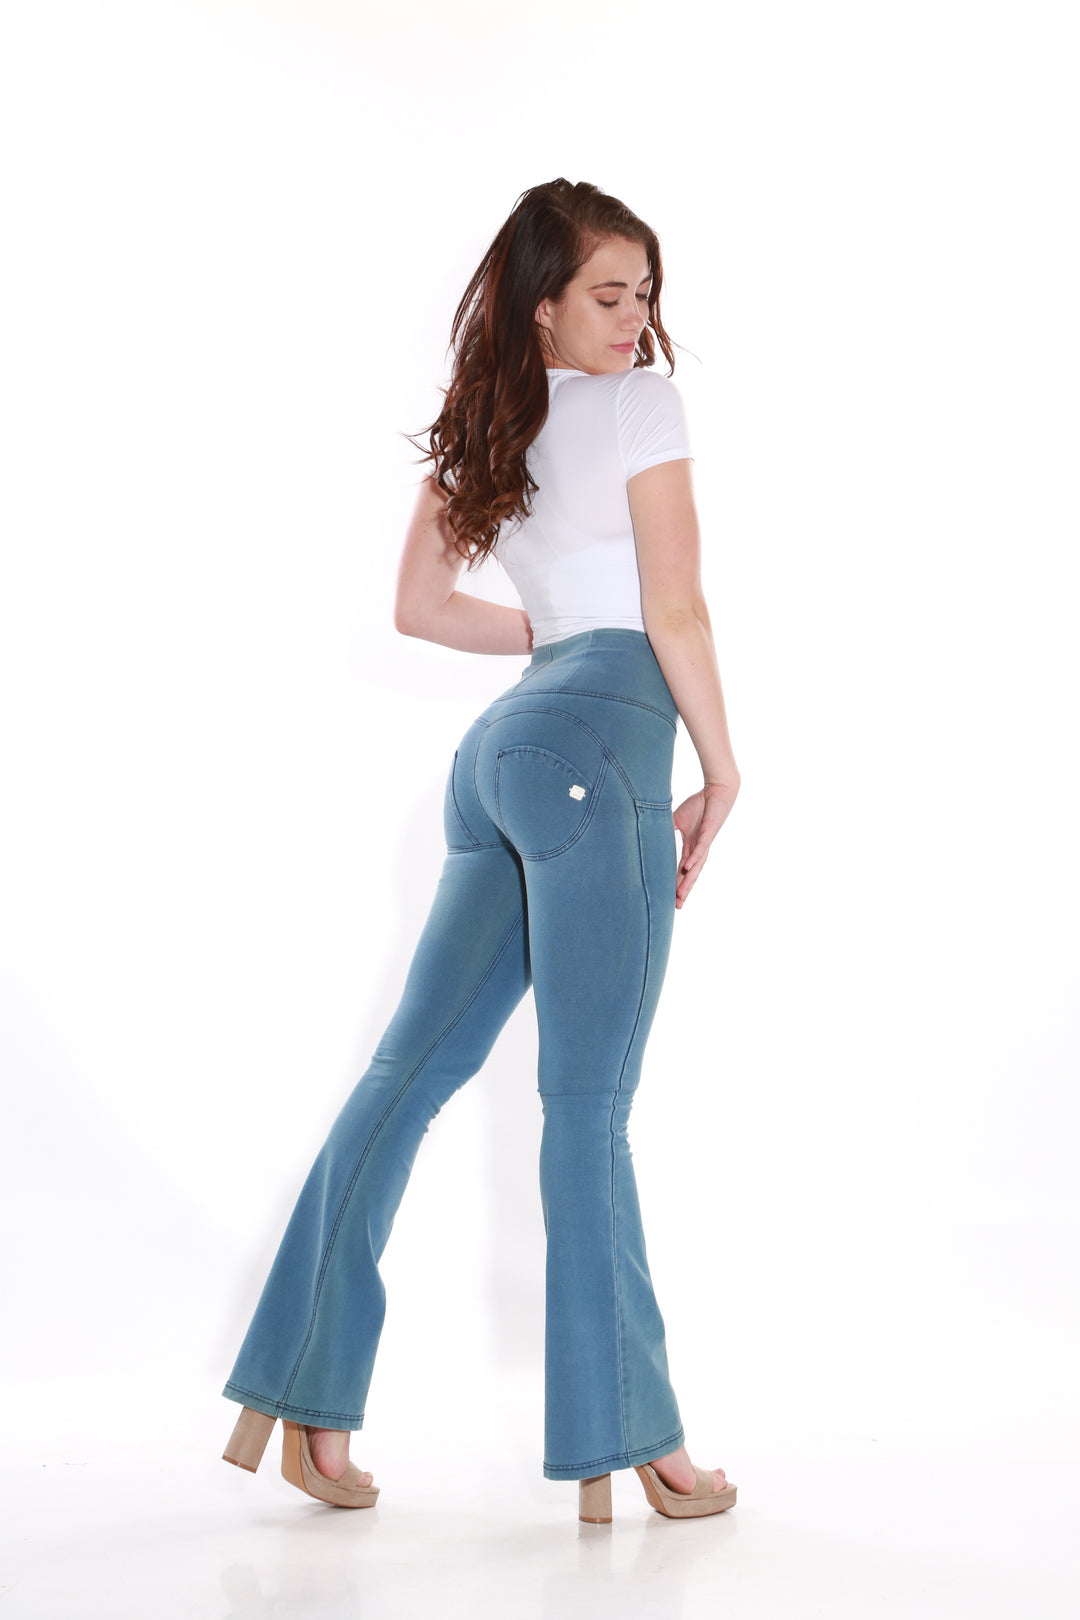 High waist Bootleg Butt lifting Flare Shaping jeans/Jeggings - Light Blueaos-init aos-animate